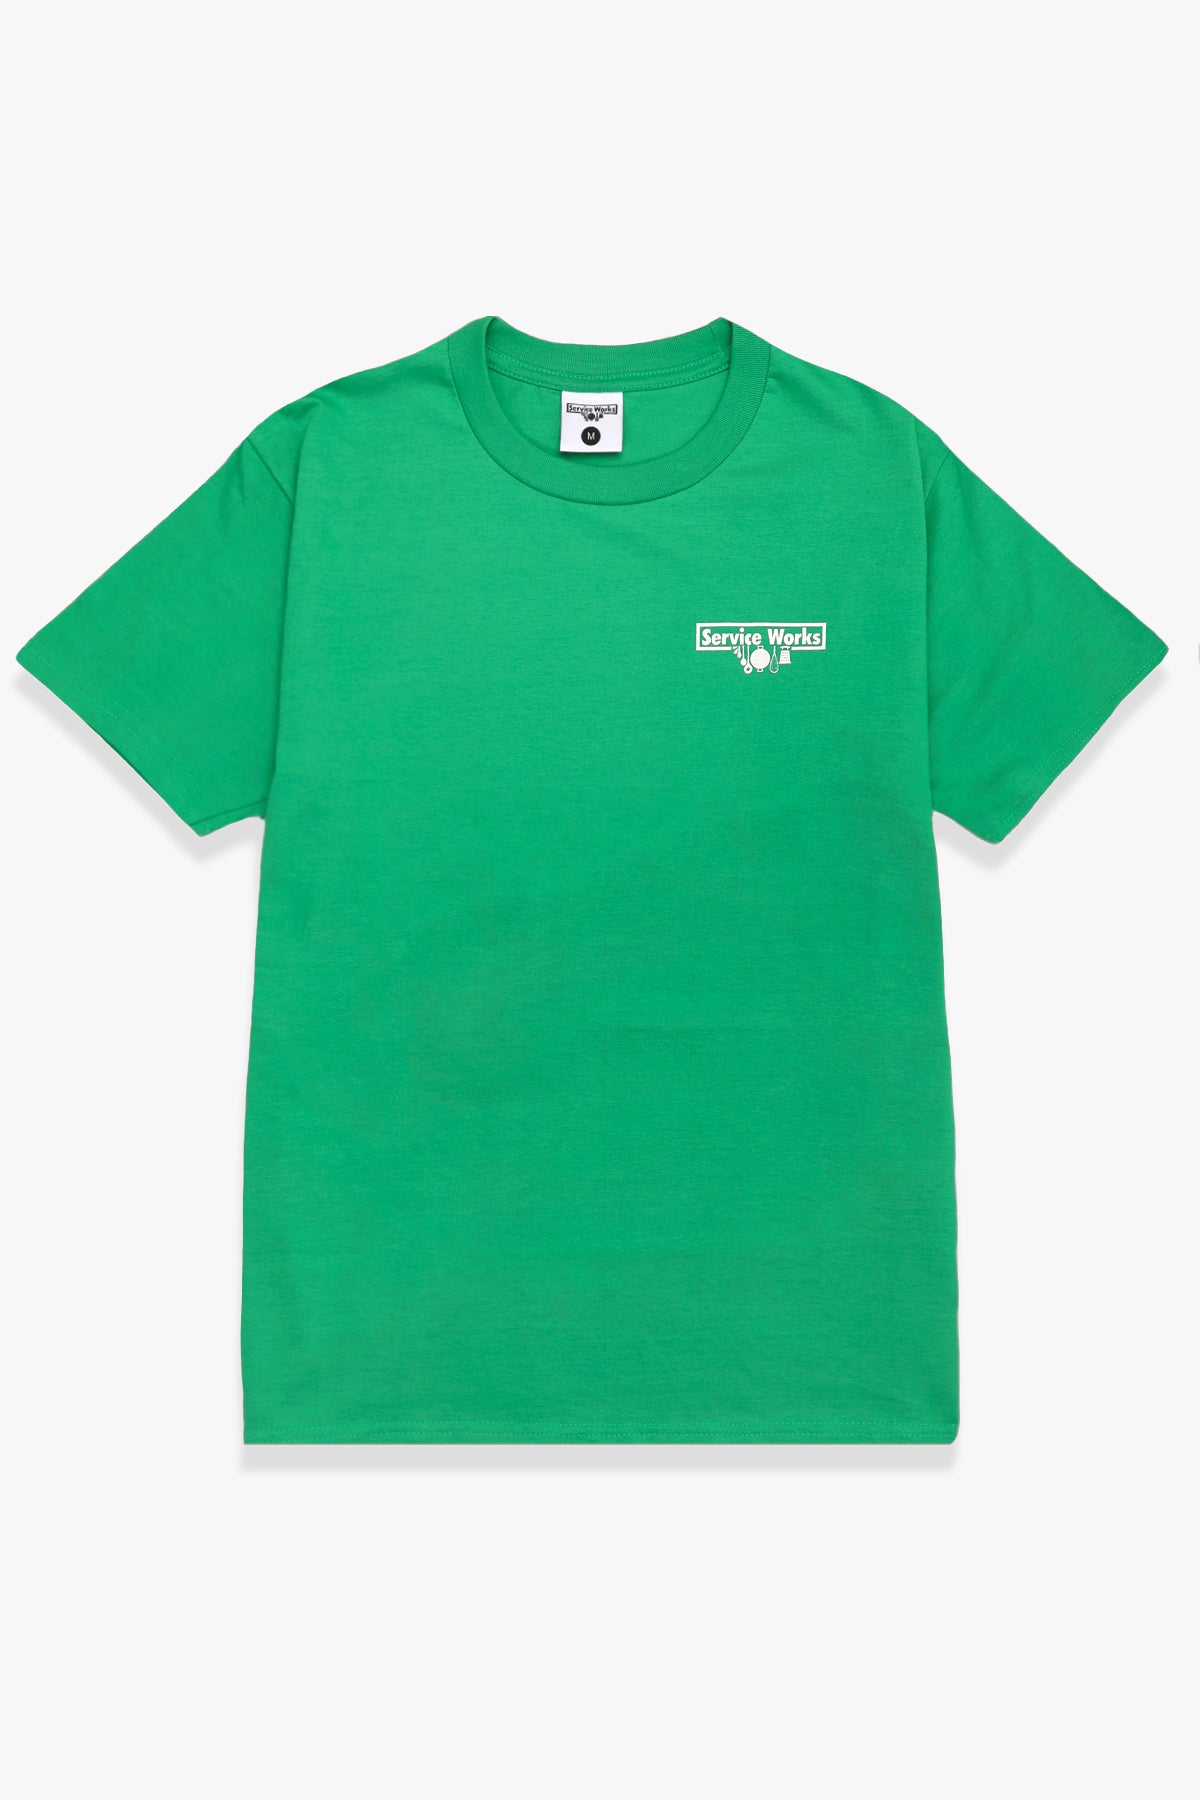 Service Works - Logo Tee - Bright Forest